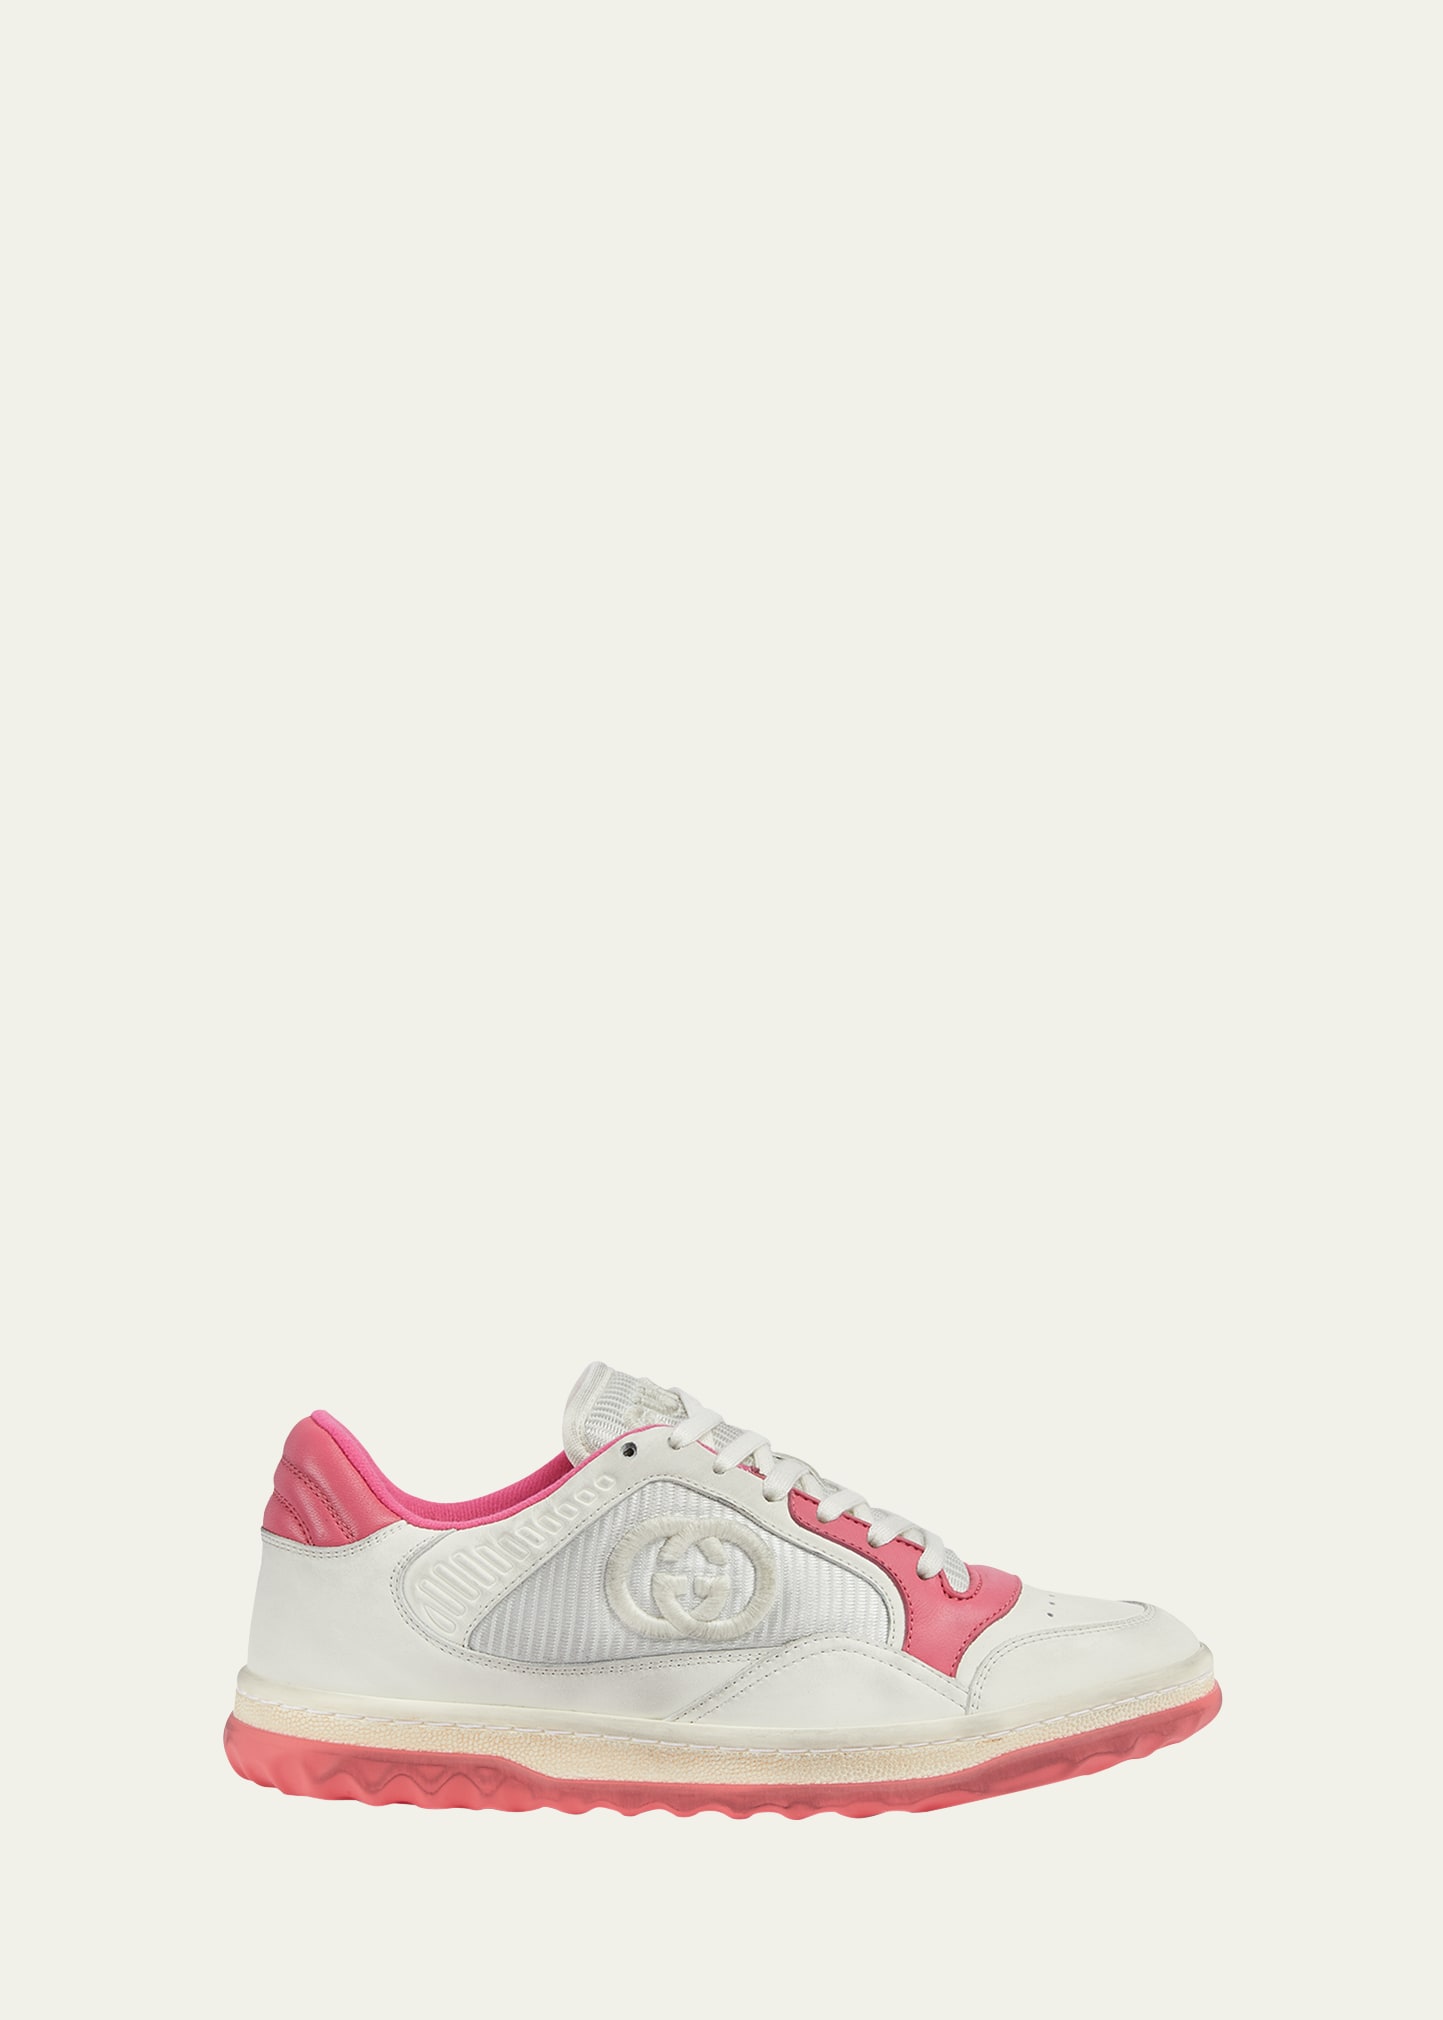 Gucci Ginza Worn Bicolor Runner Sneakers In Off White